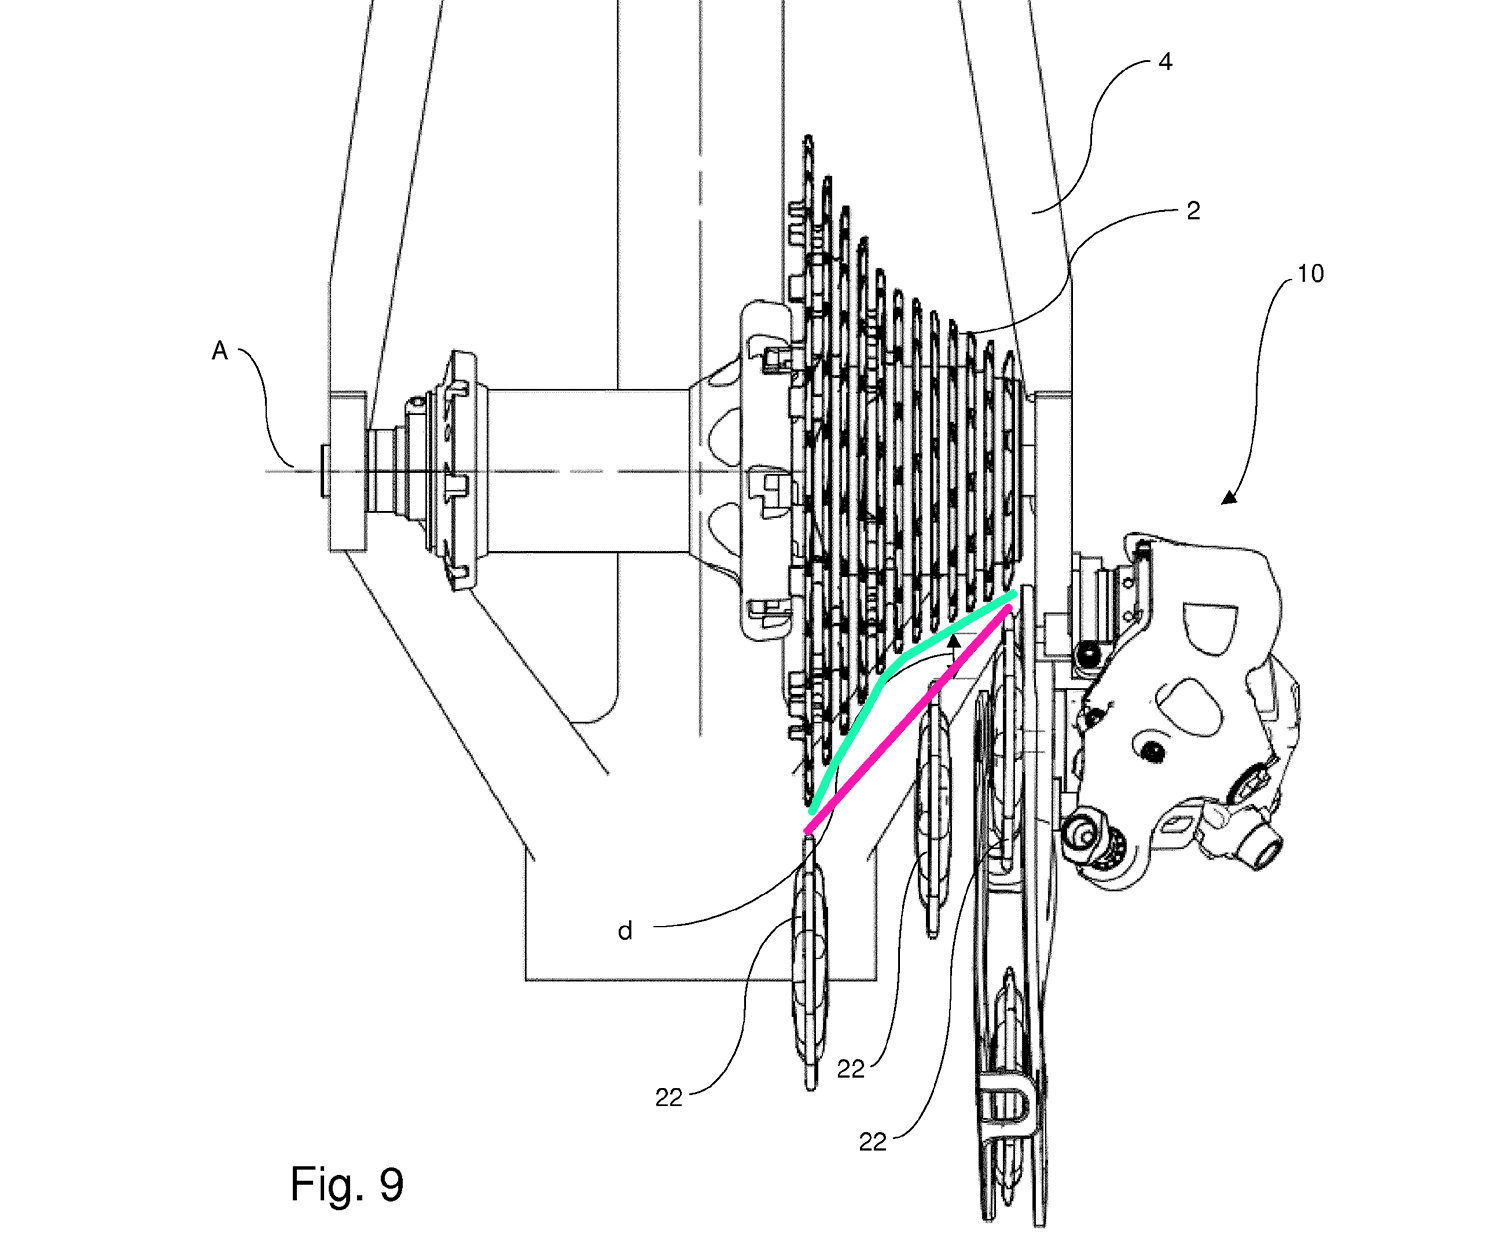 campagnolo patent drawing shows a curving movement path for the rear derailleur upper pulley